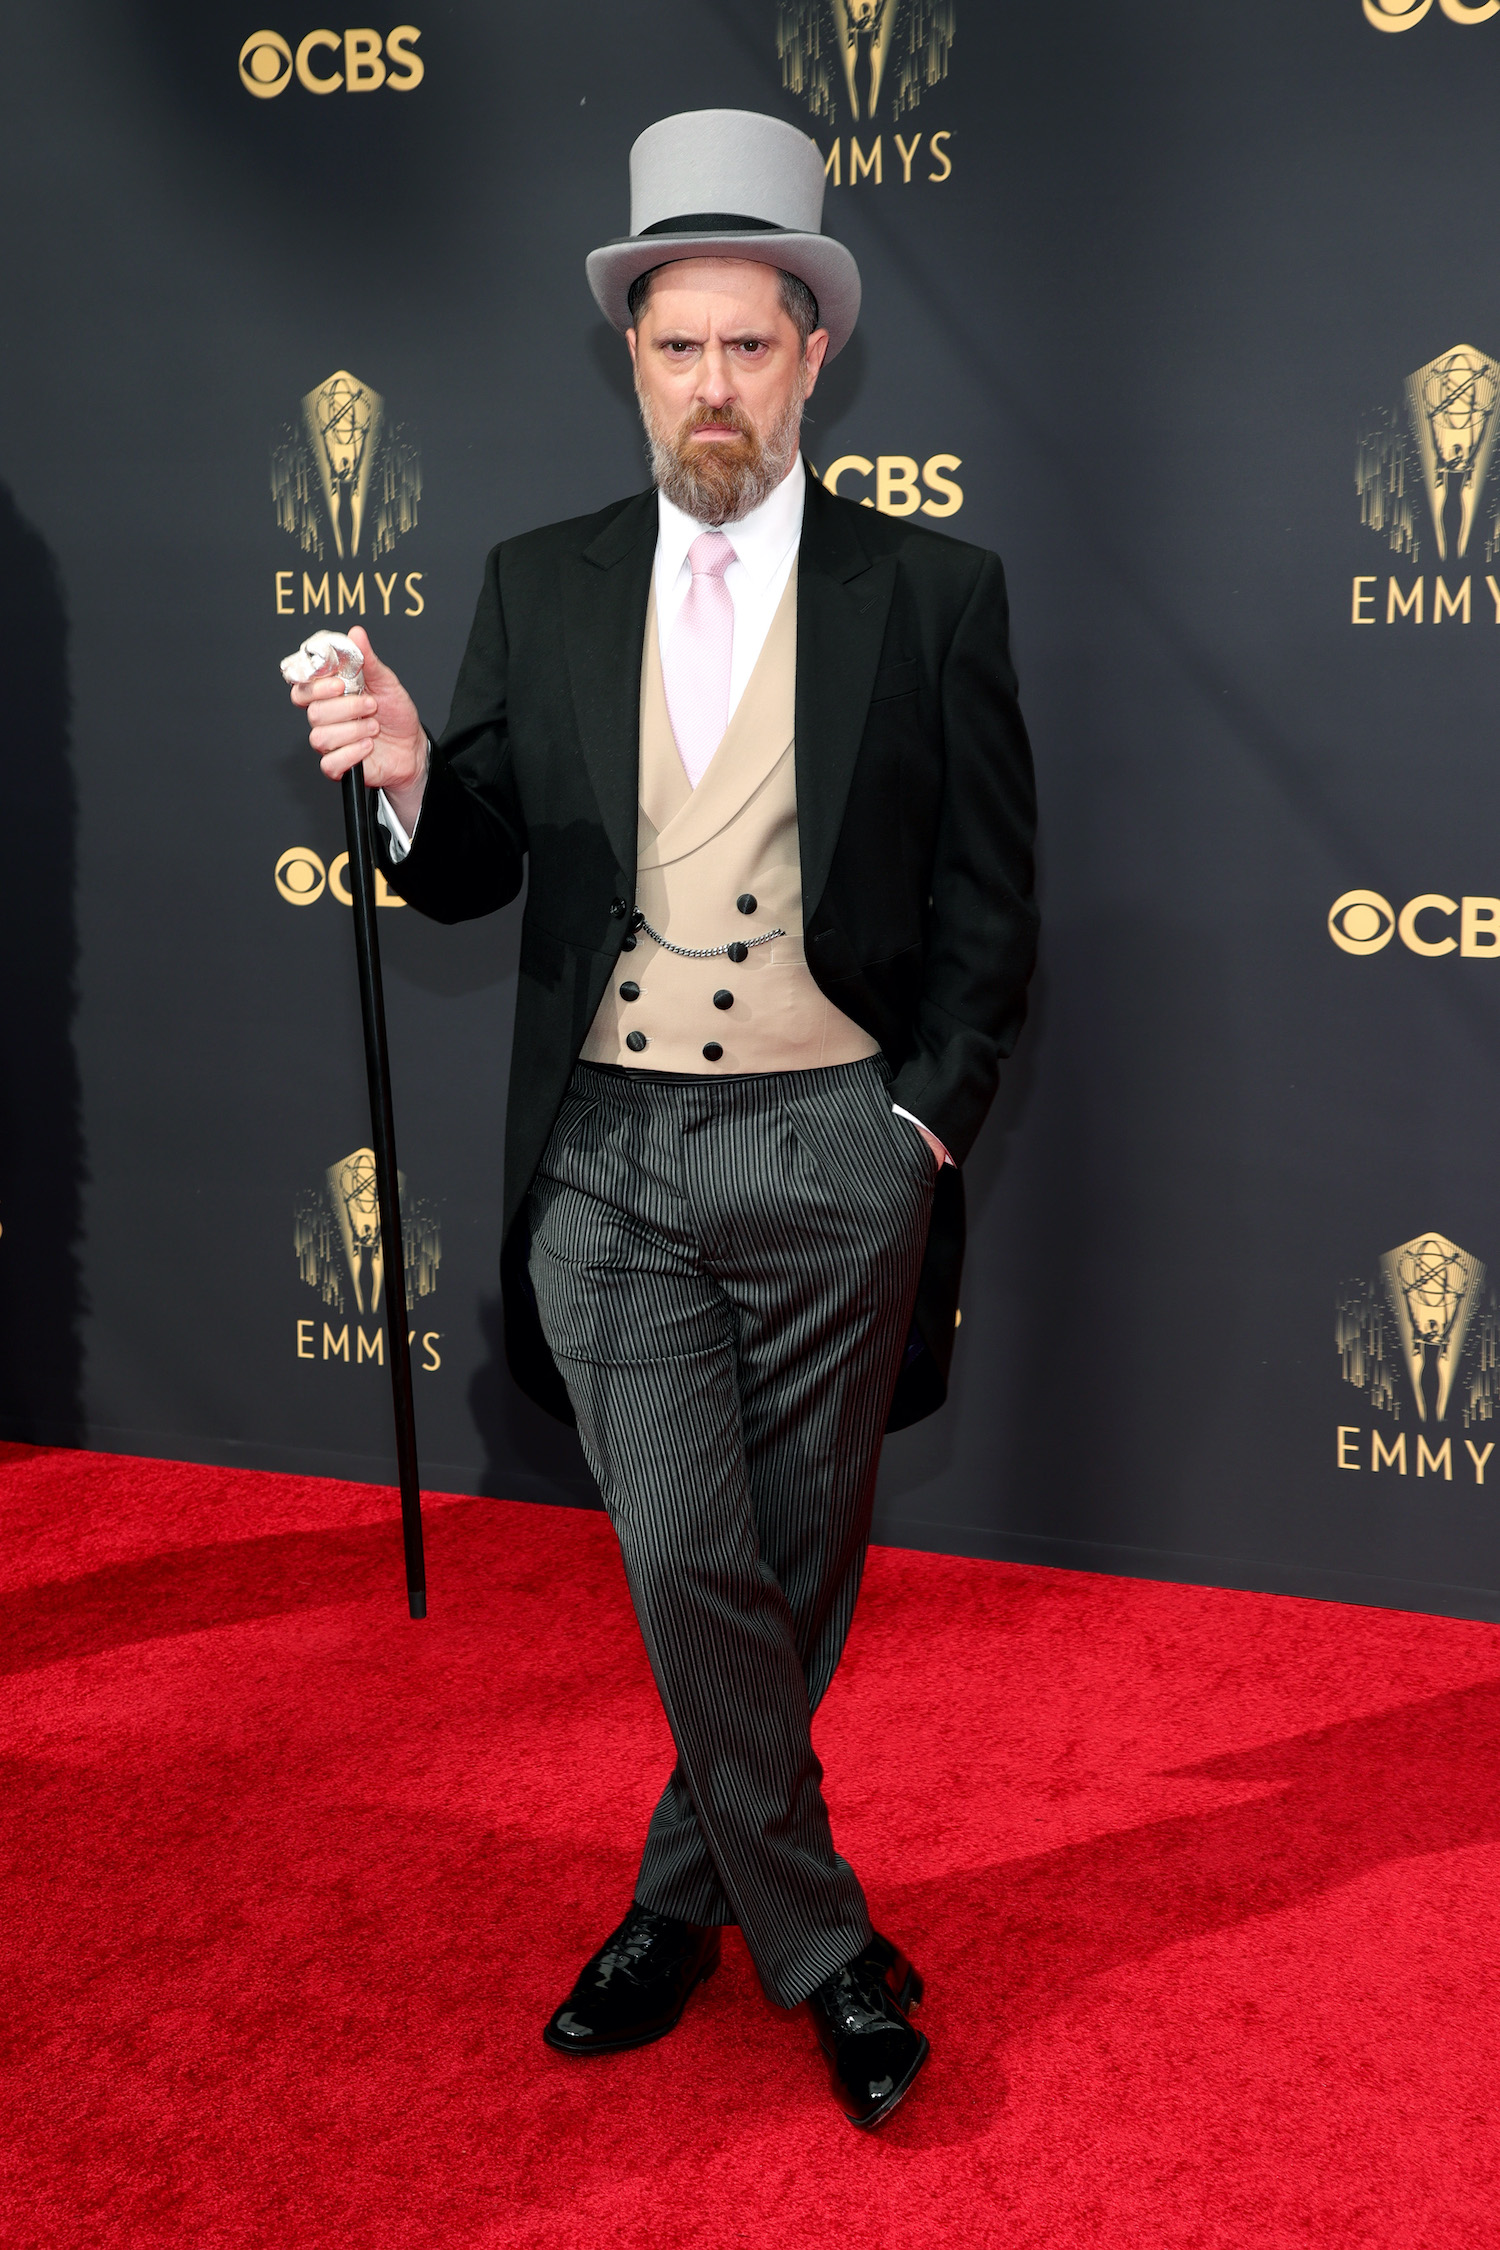 Brendan Hunt wears a tuxedo with tails, top hat, and cane on the red carpet at the 2021 Emmys 